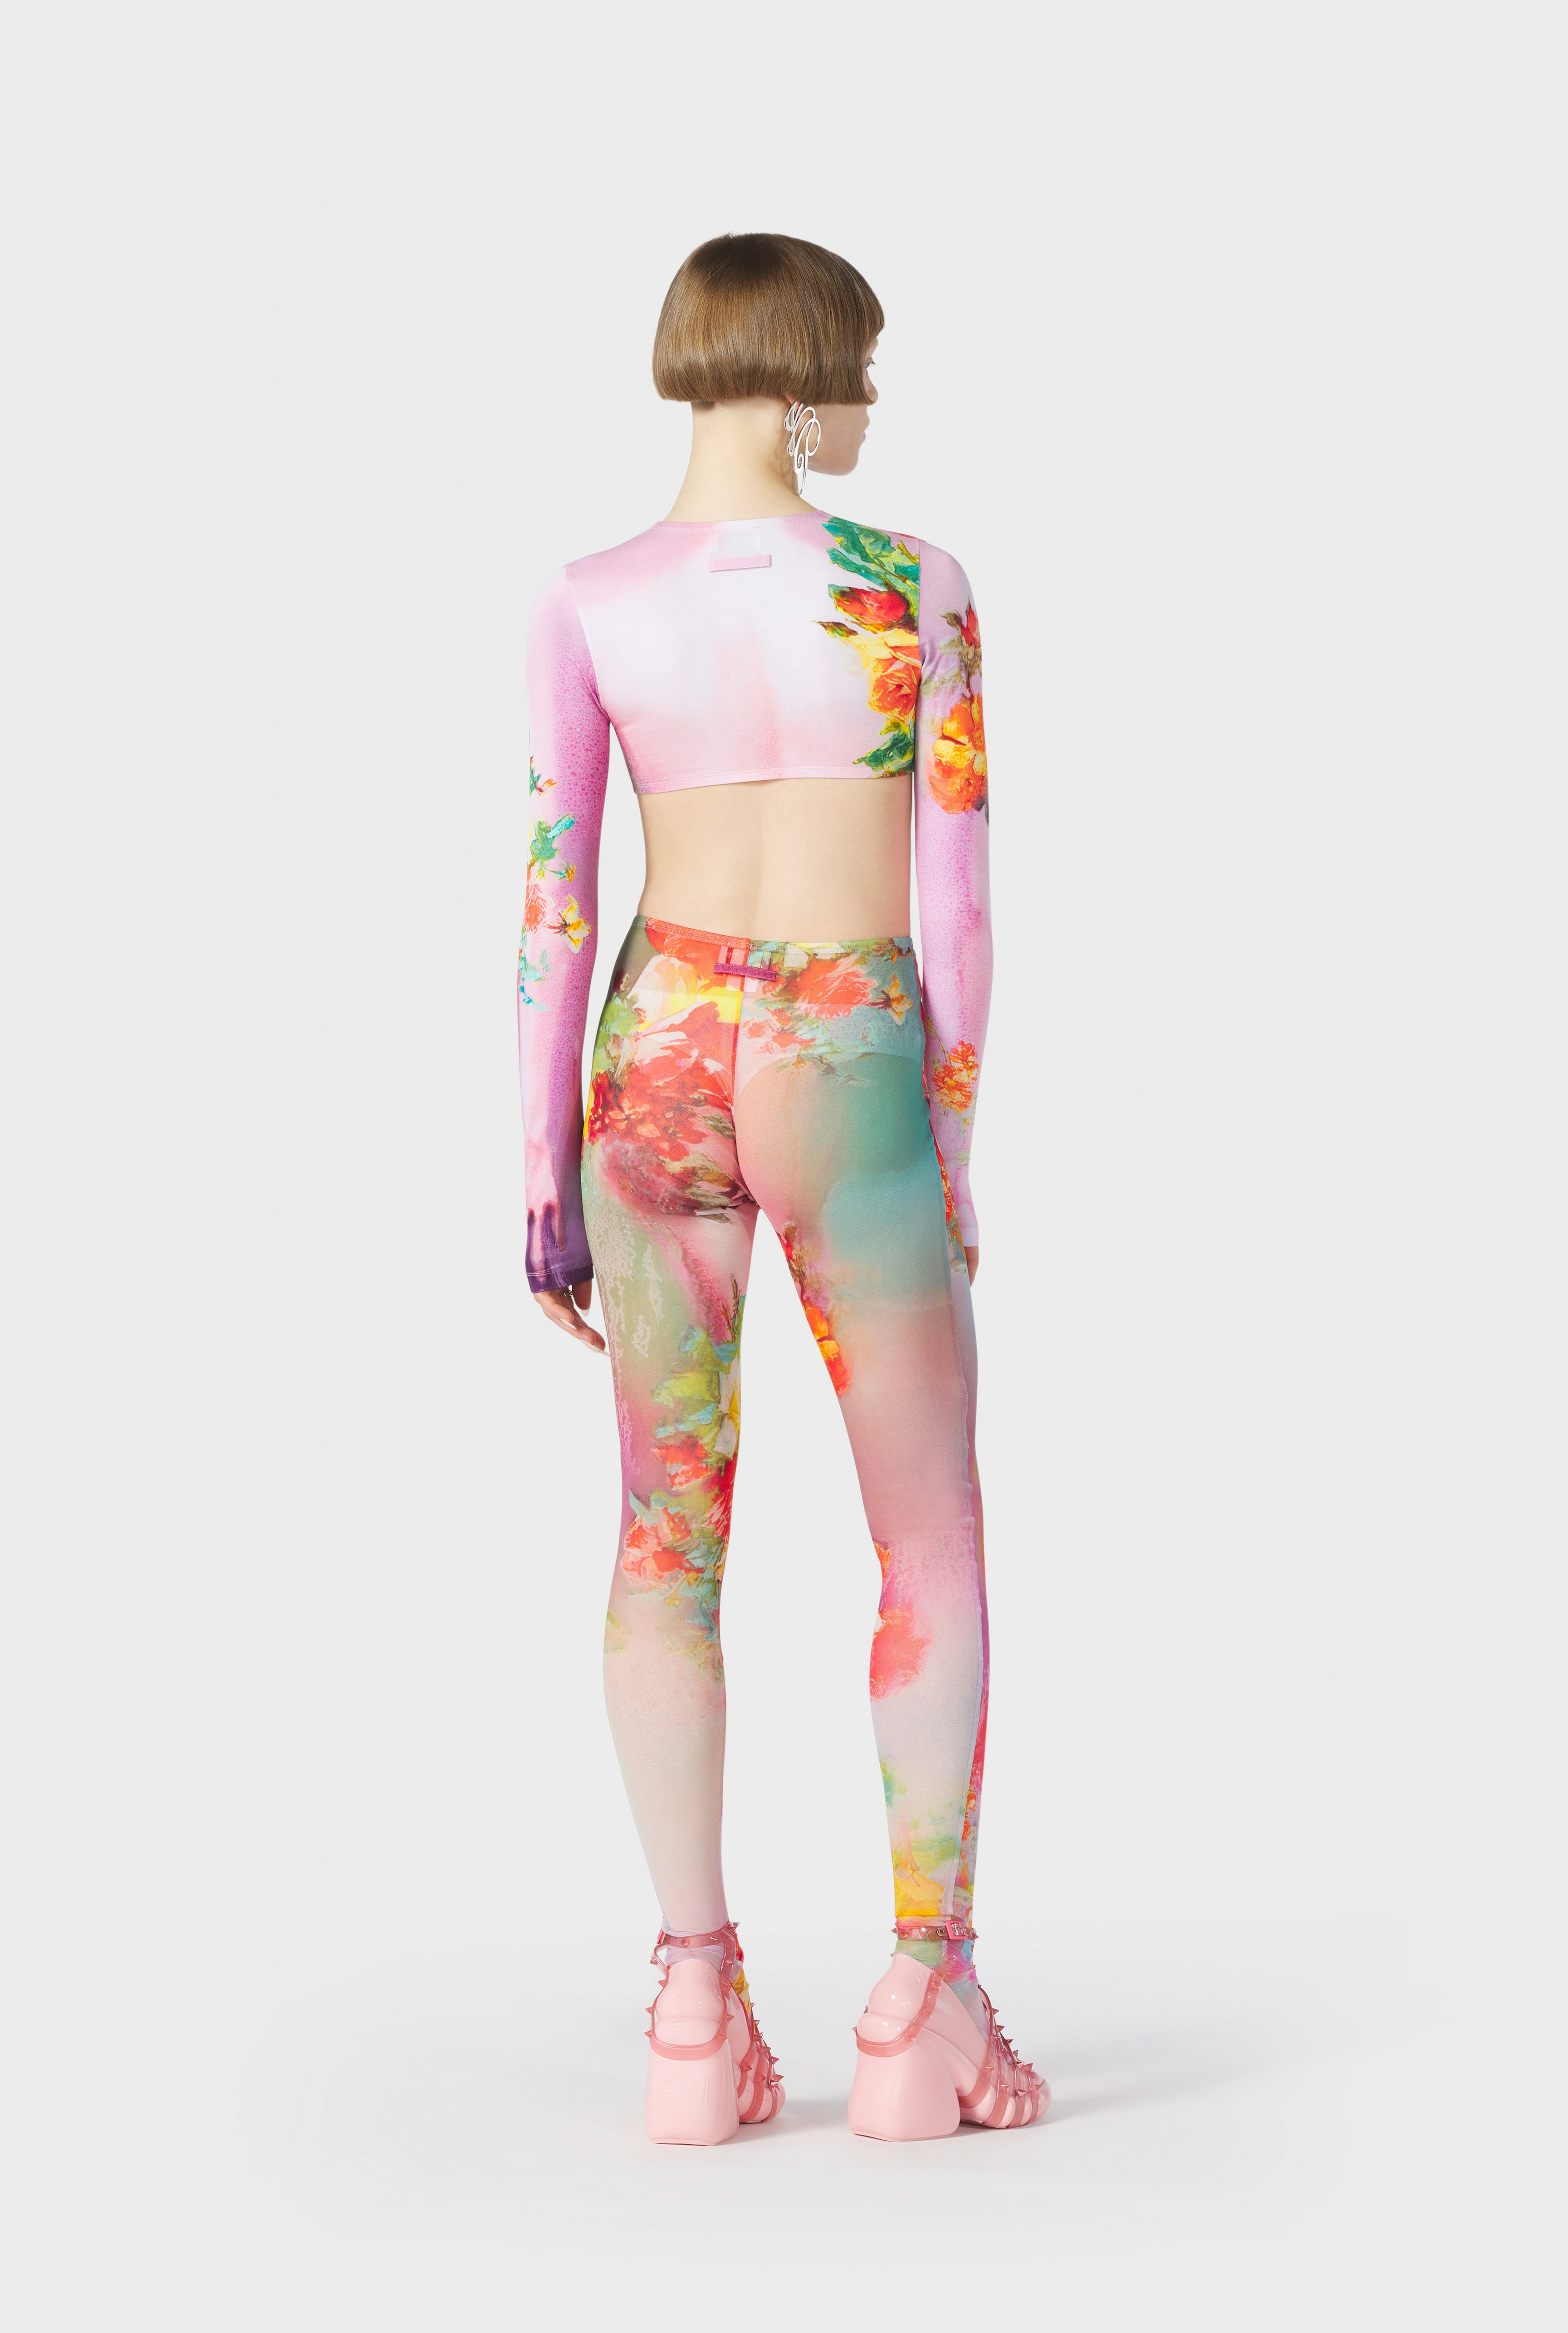 The Pink Body Flower Tights